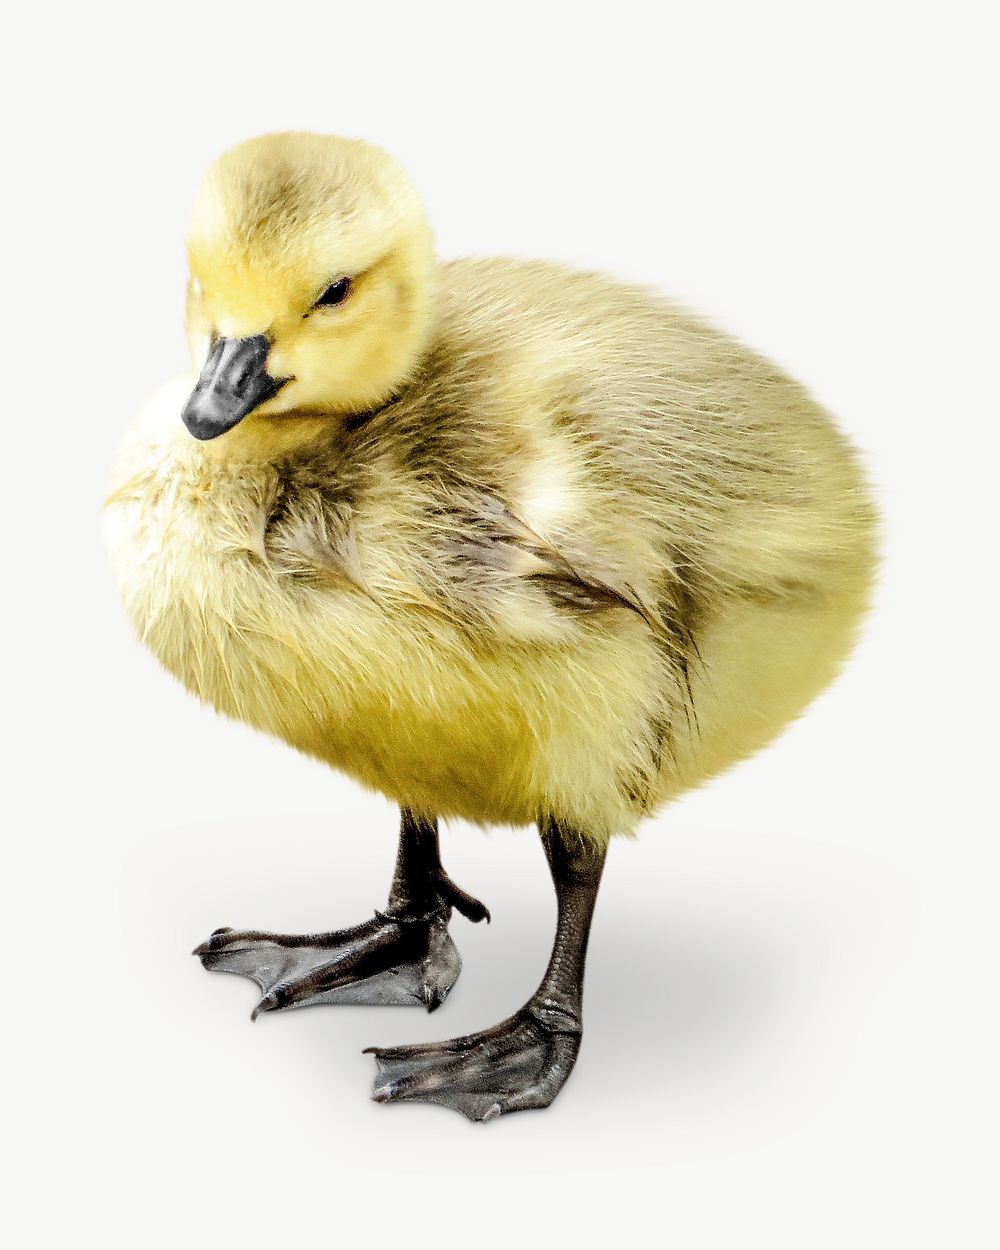 Duckling image graphic psd